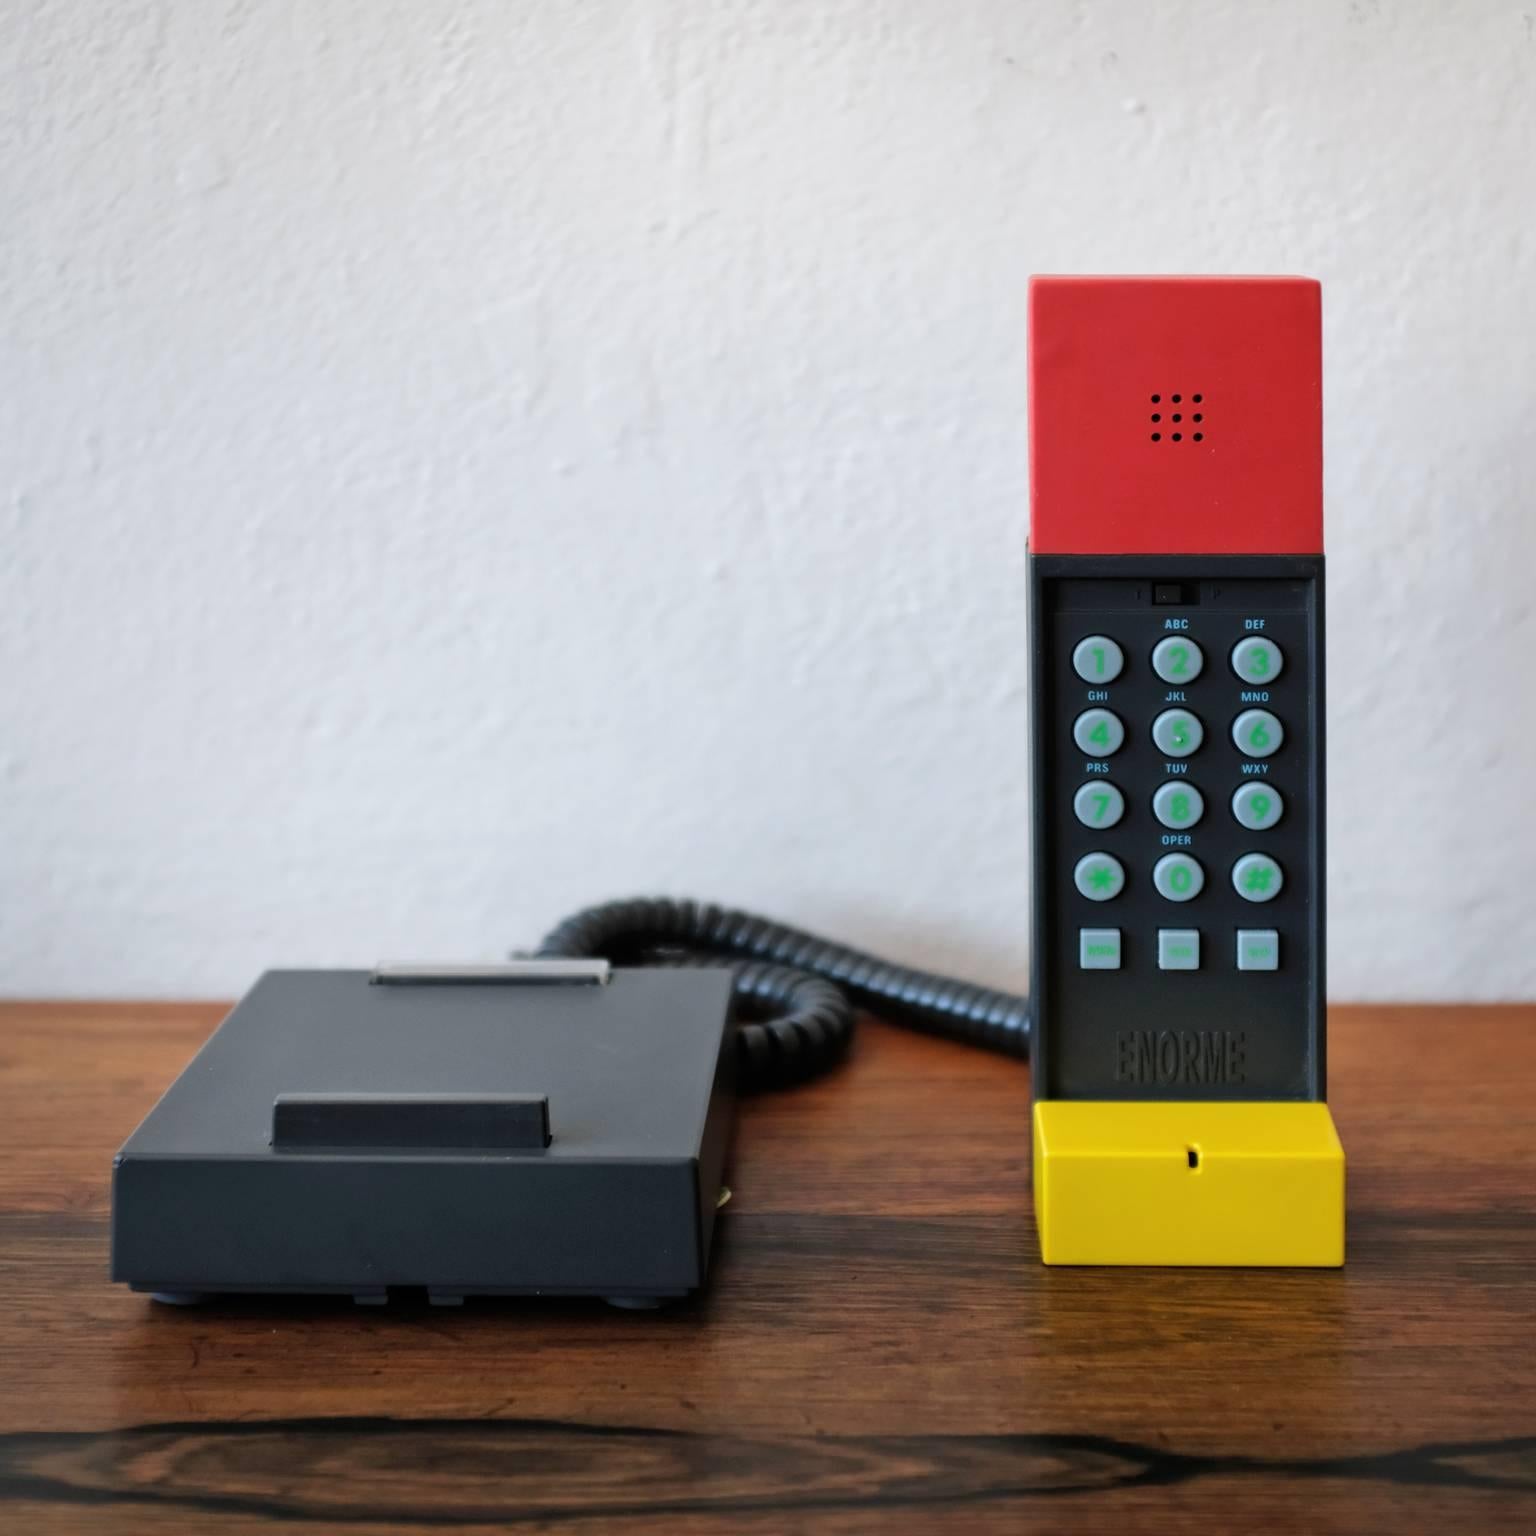 Ettore Sottsass Enorme telephone from 1986. Includes the original instructions and box. The phone has been used. It functions properly. The design is included in the collections of MoMa and The Met.